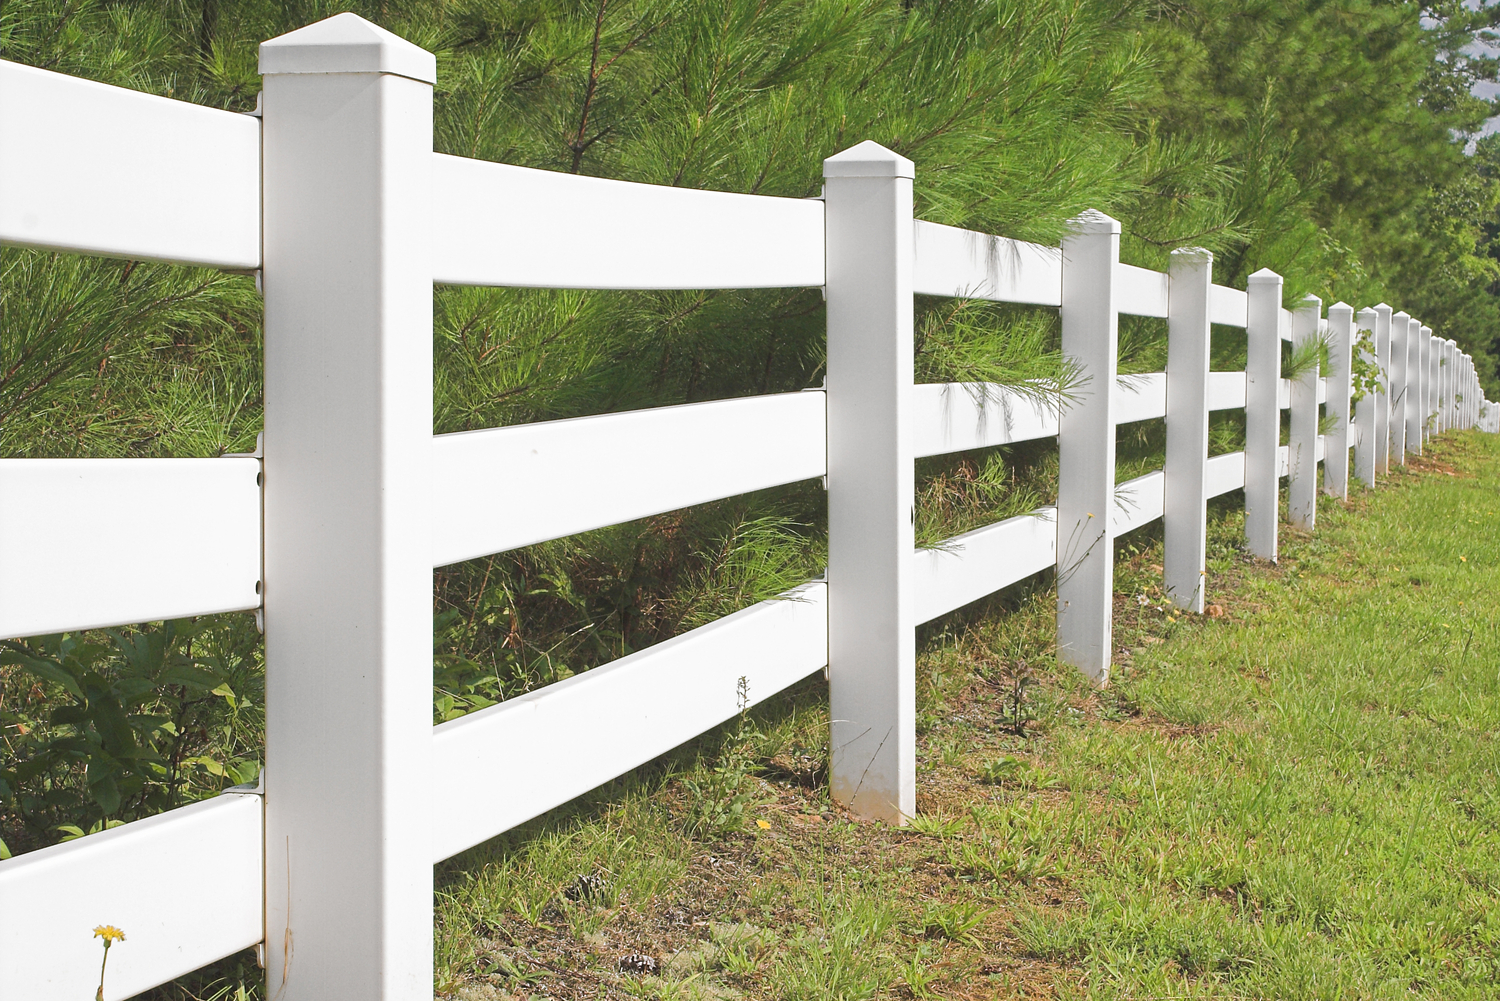 Countryside vinyl fence during day